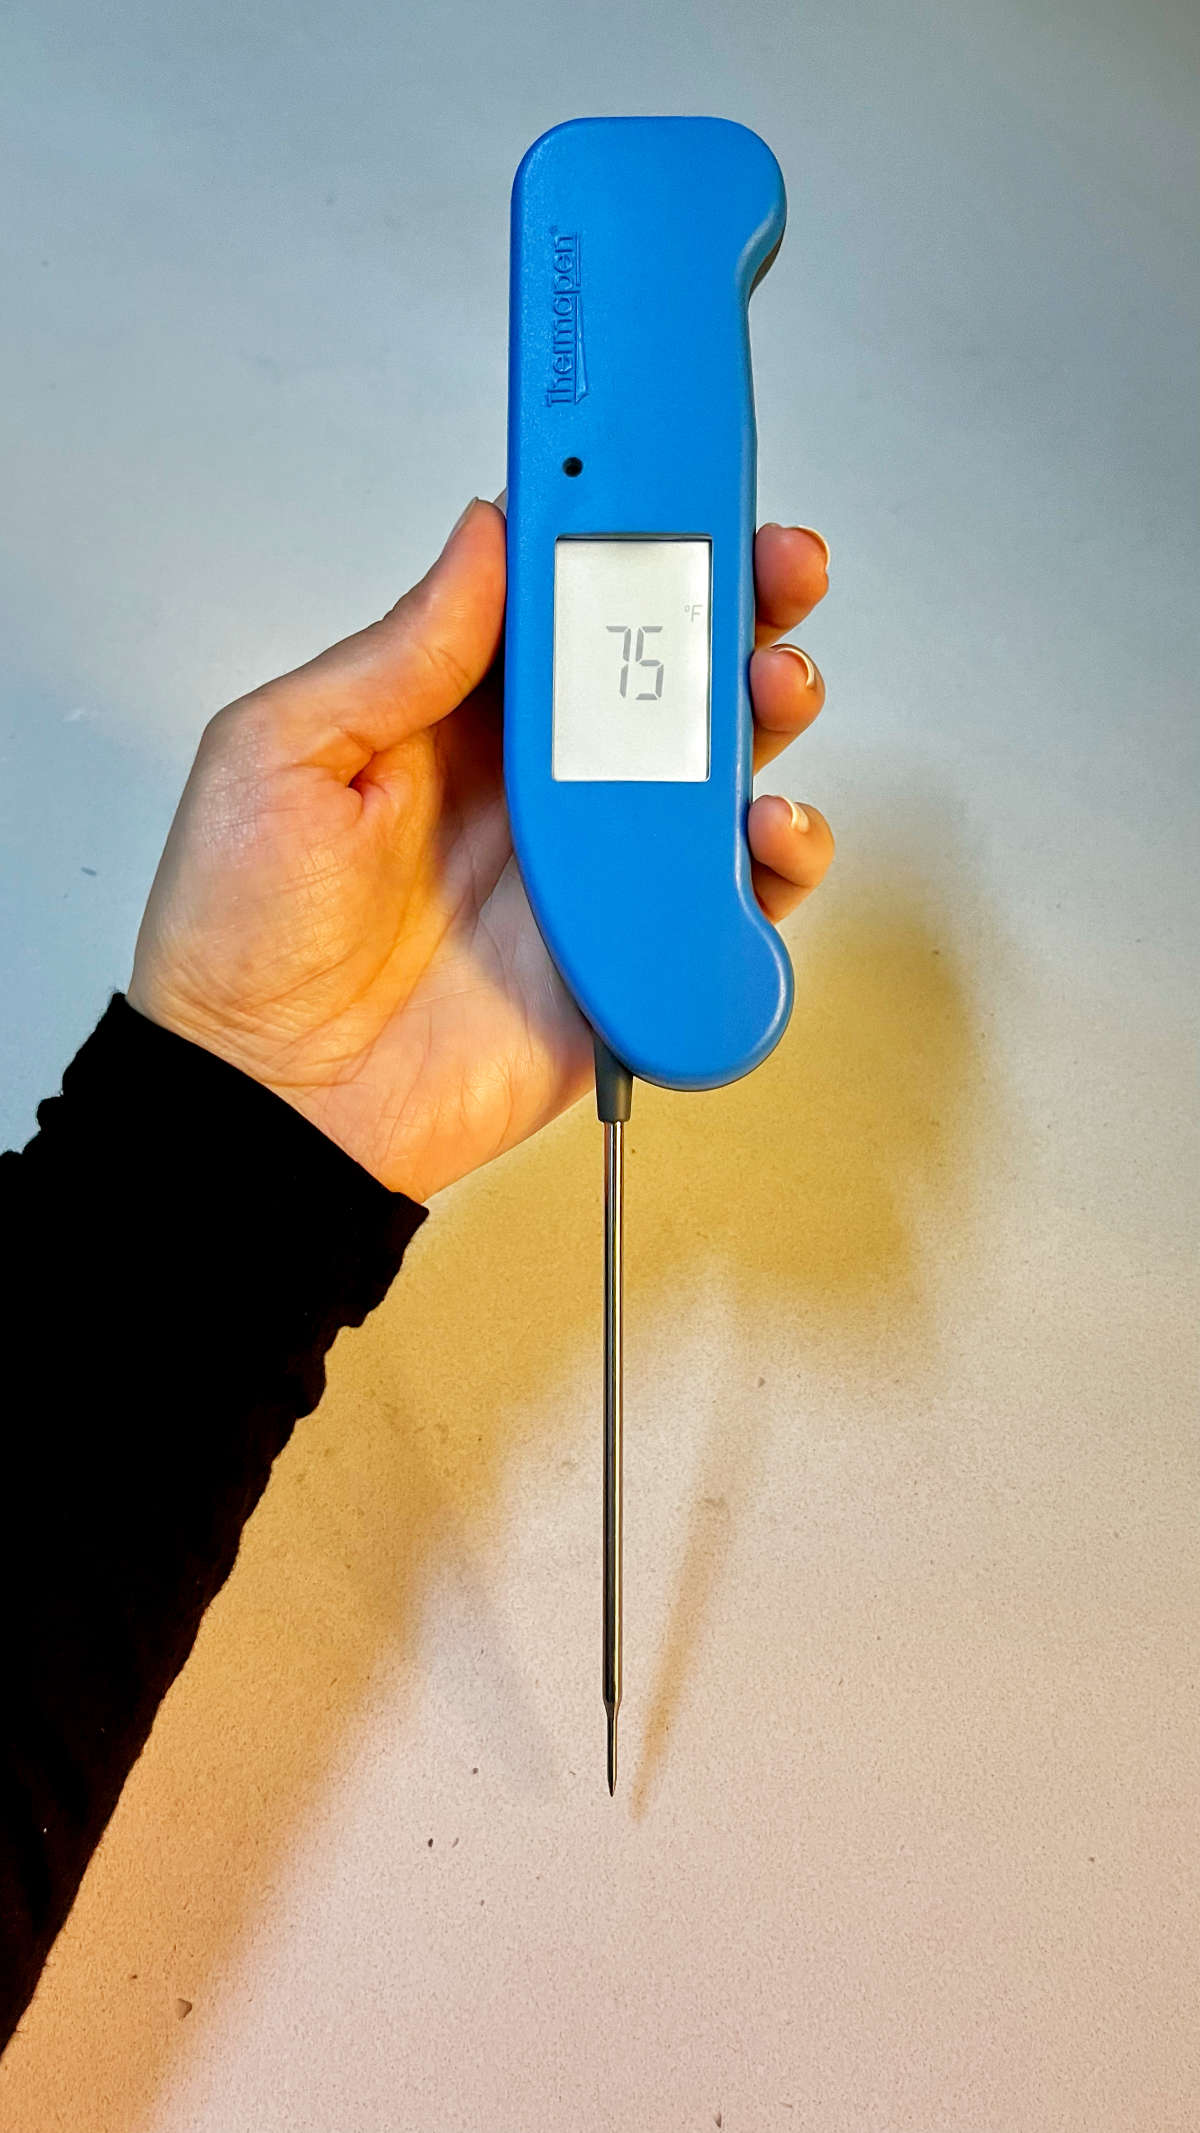 Holding a thermometer with a vertical temperature window.